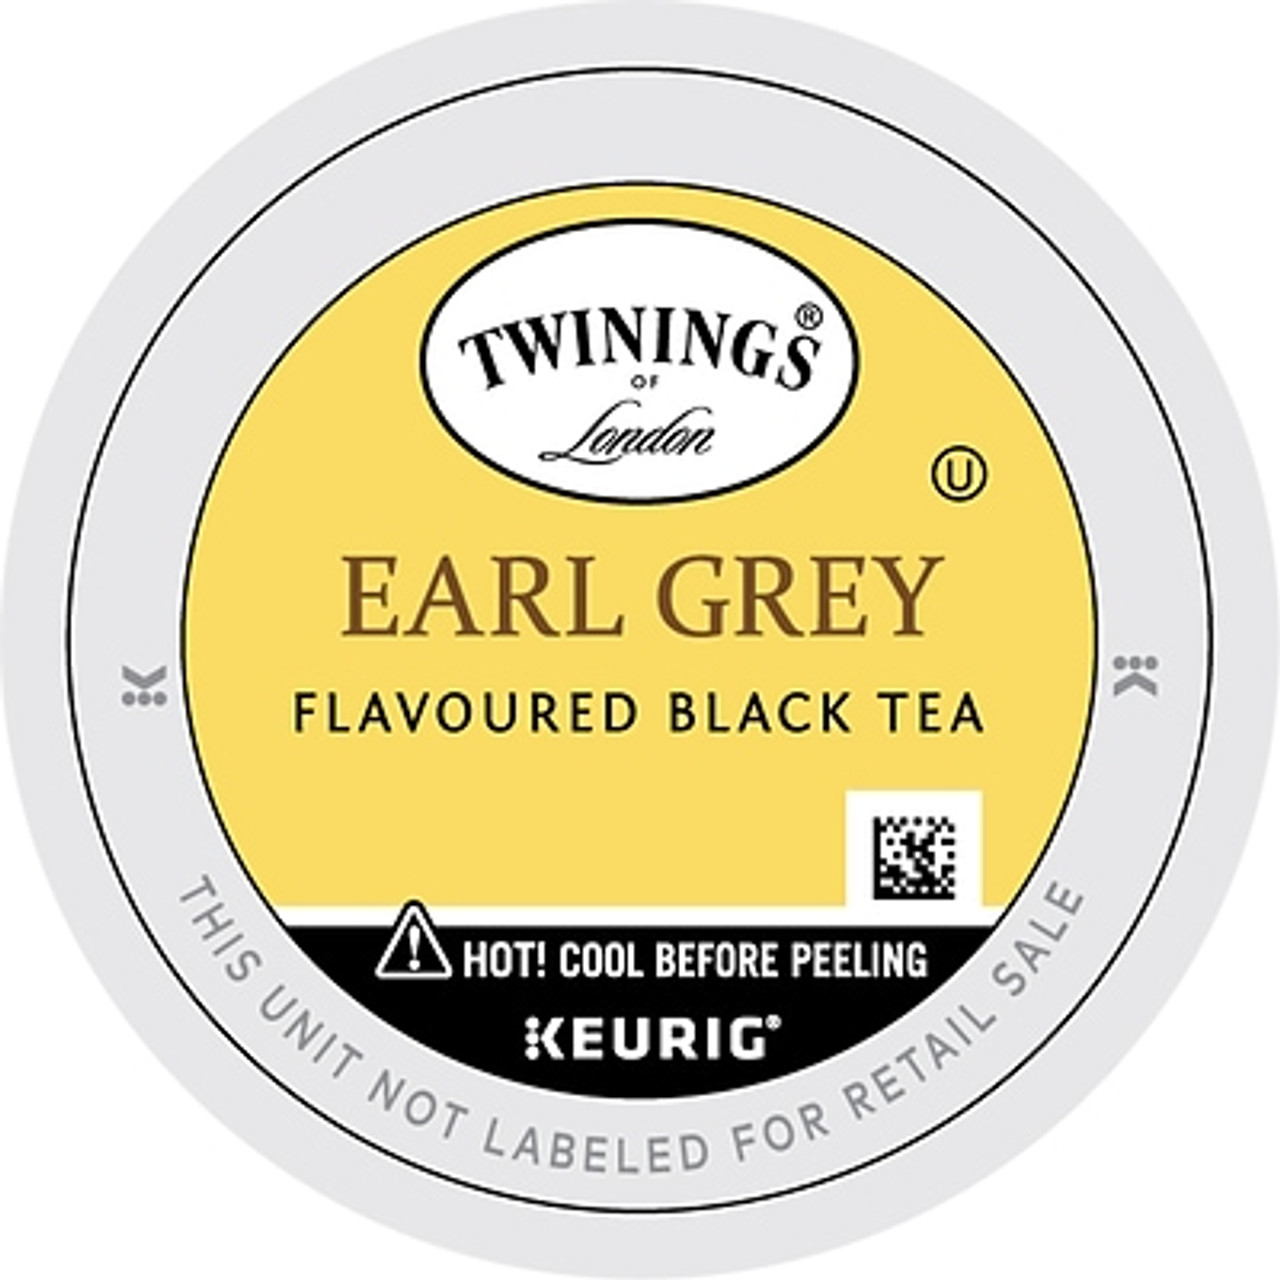 A really fine cup of tea is one of life's true pleasures. Choose Earl Grey for the enjoyment it will bring to your tea drinking. This delicately scented, aristocratic blend is an international favorite.